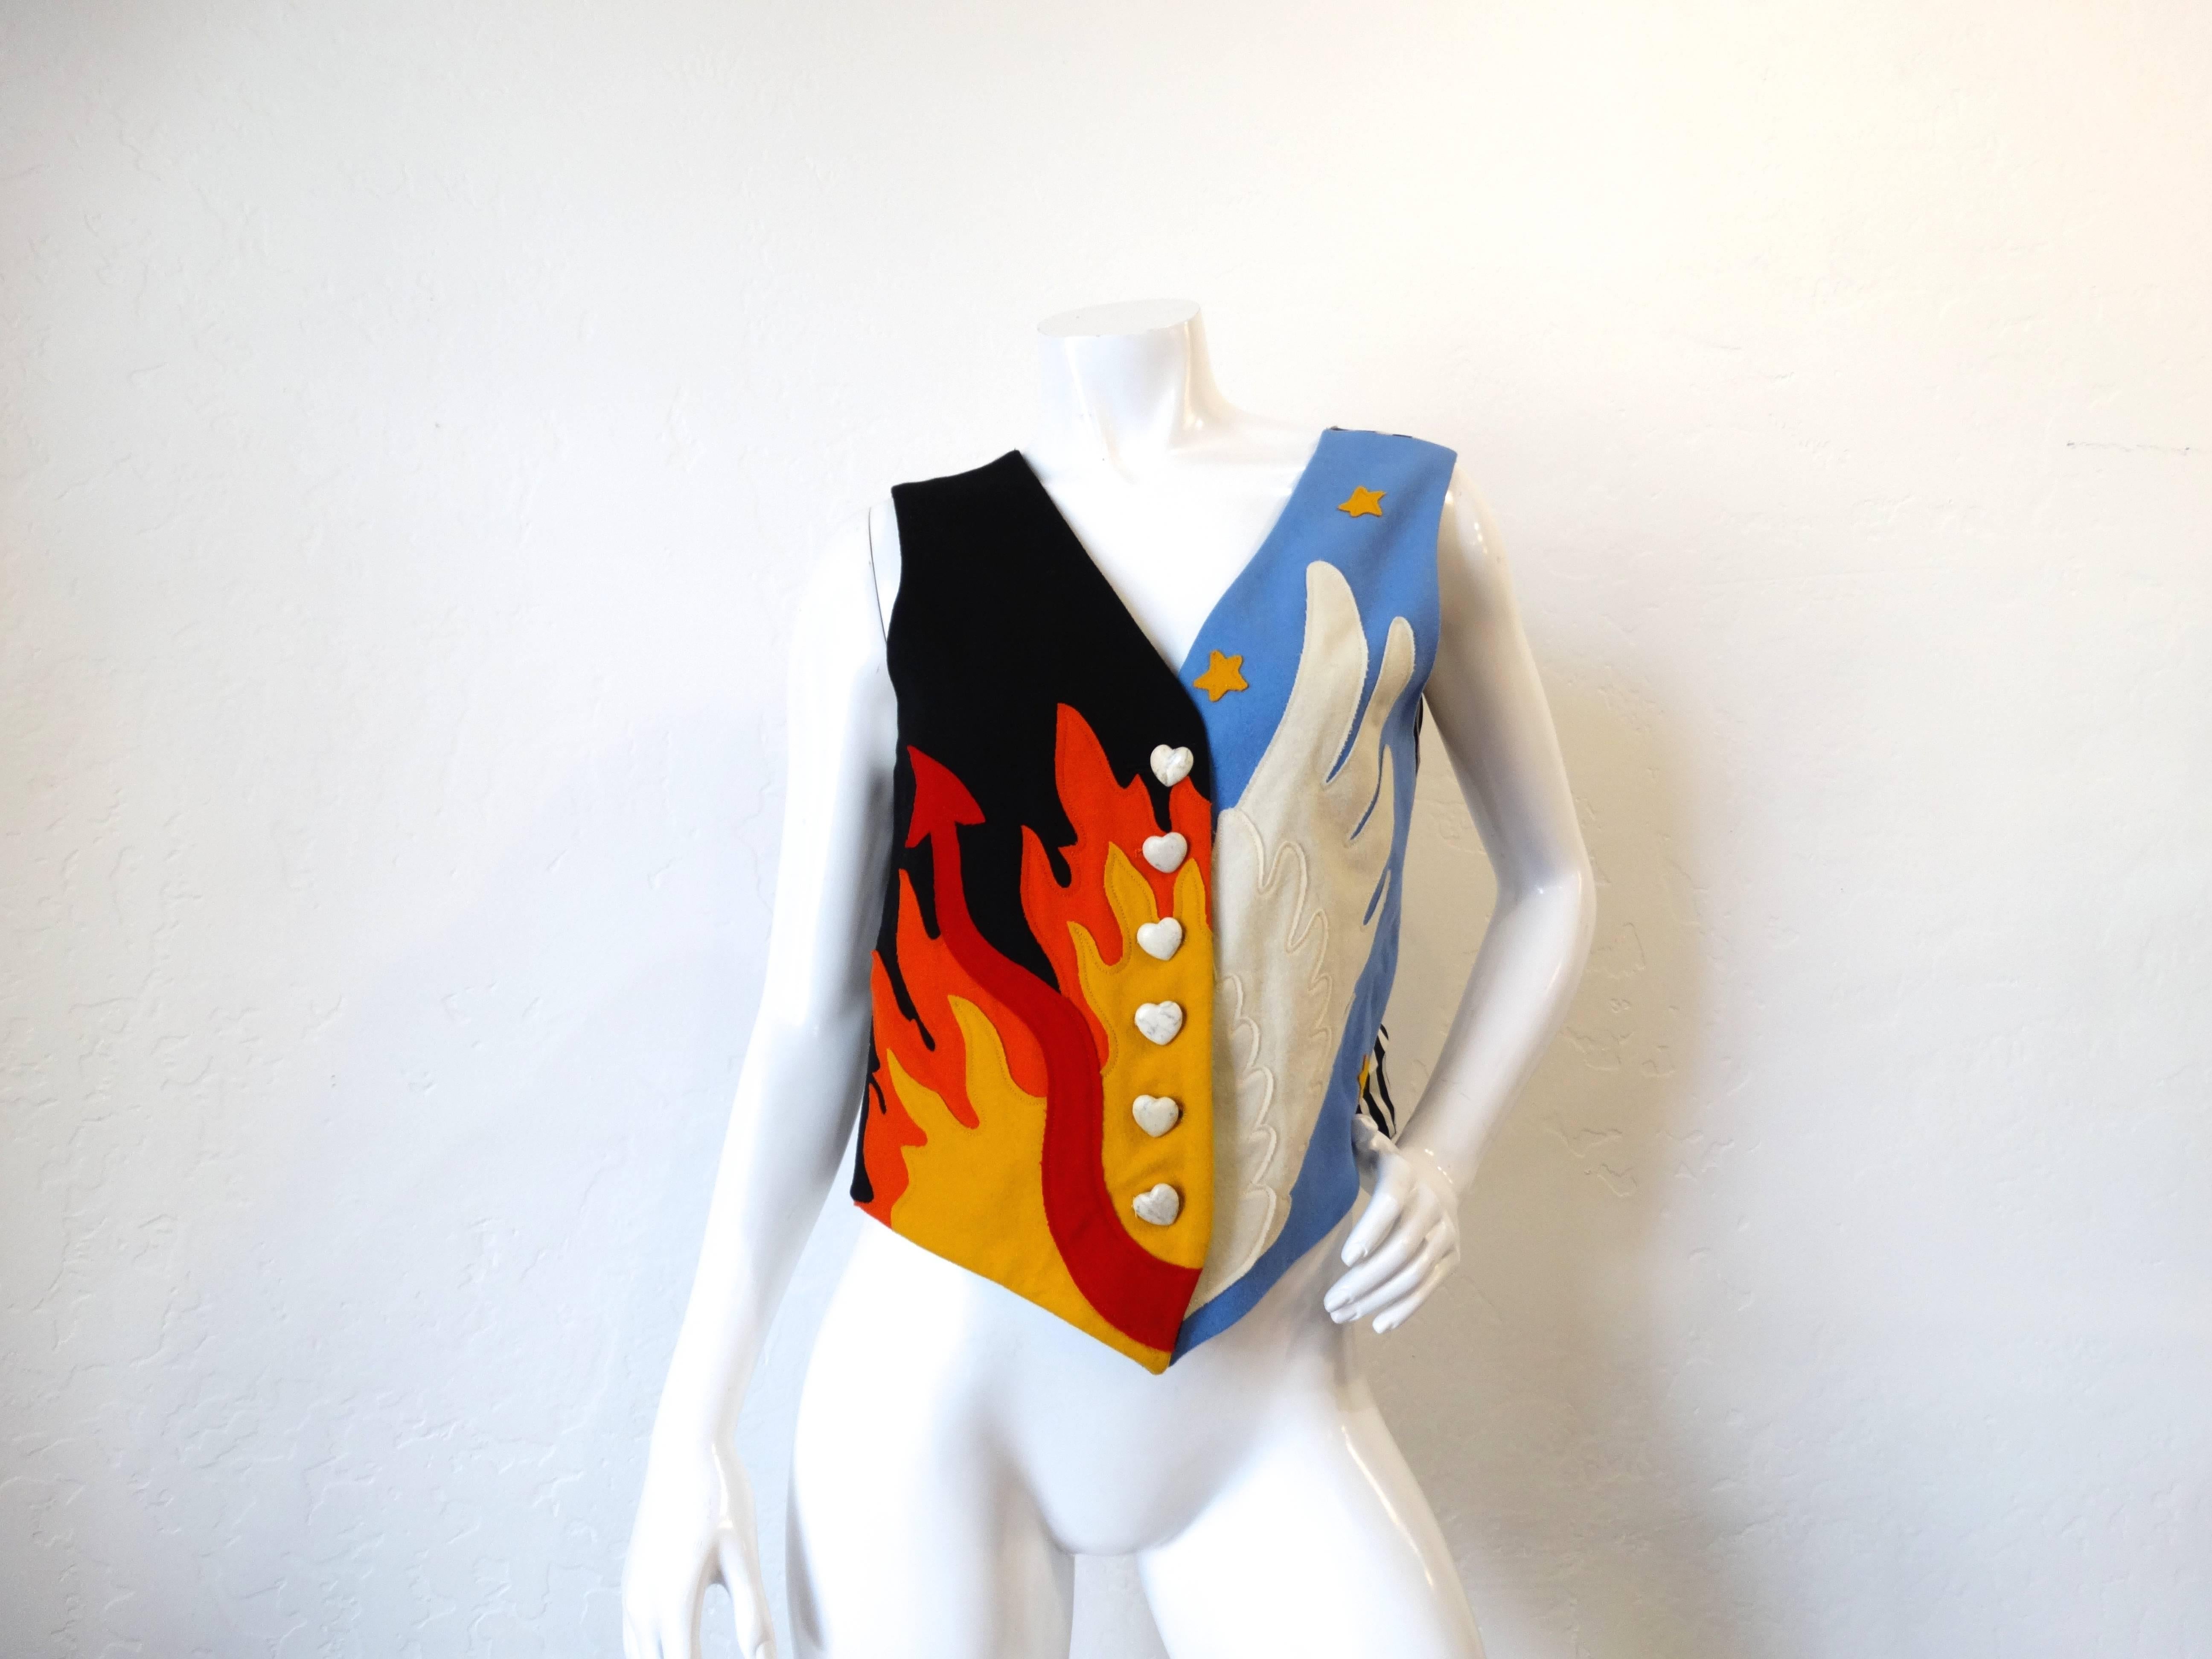 This rare vintage Moschino vest features a double graphic wool felt patchwork front, one black side with gold and orange flames with a devil's tail Hell motif and the other a sky blue with gold stars and cream angel wing in a Heaven motif, and a